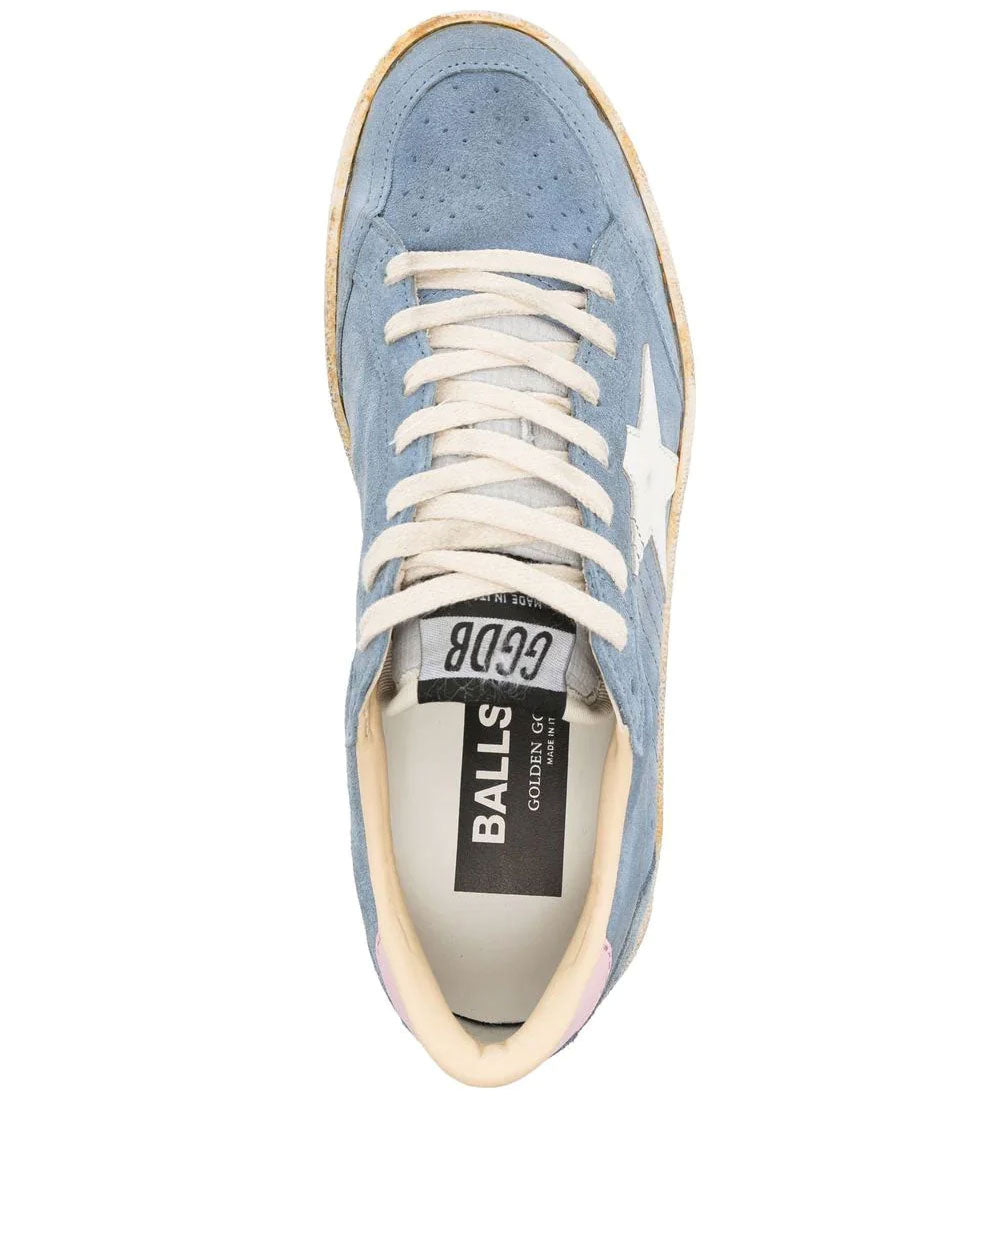 Ballstar Suede Sneaker in Powder Blue and Pink